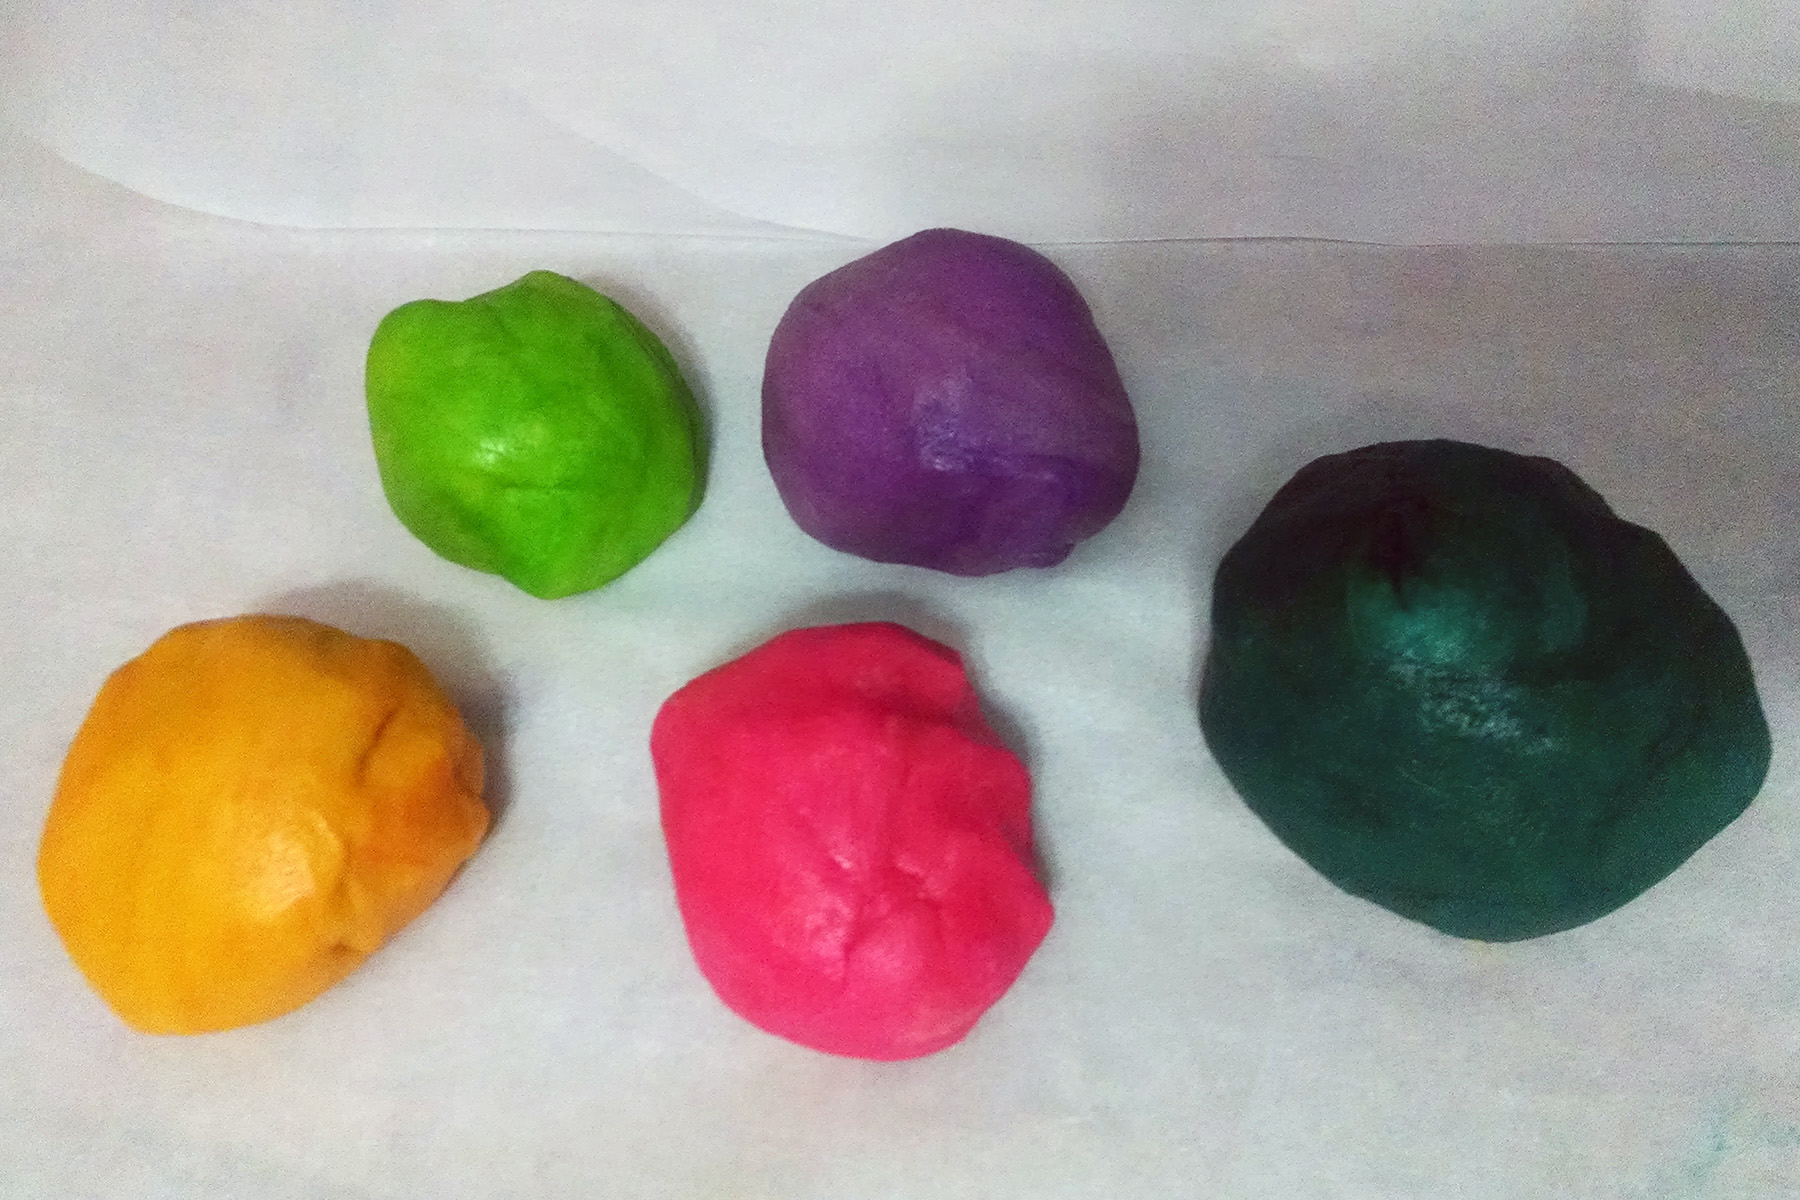 5 balls of brightly coloured cookie dough, in pink, yellow, green, purple, and teal.